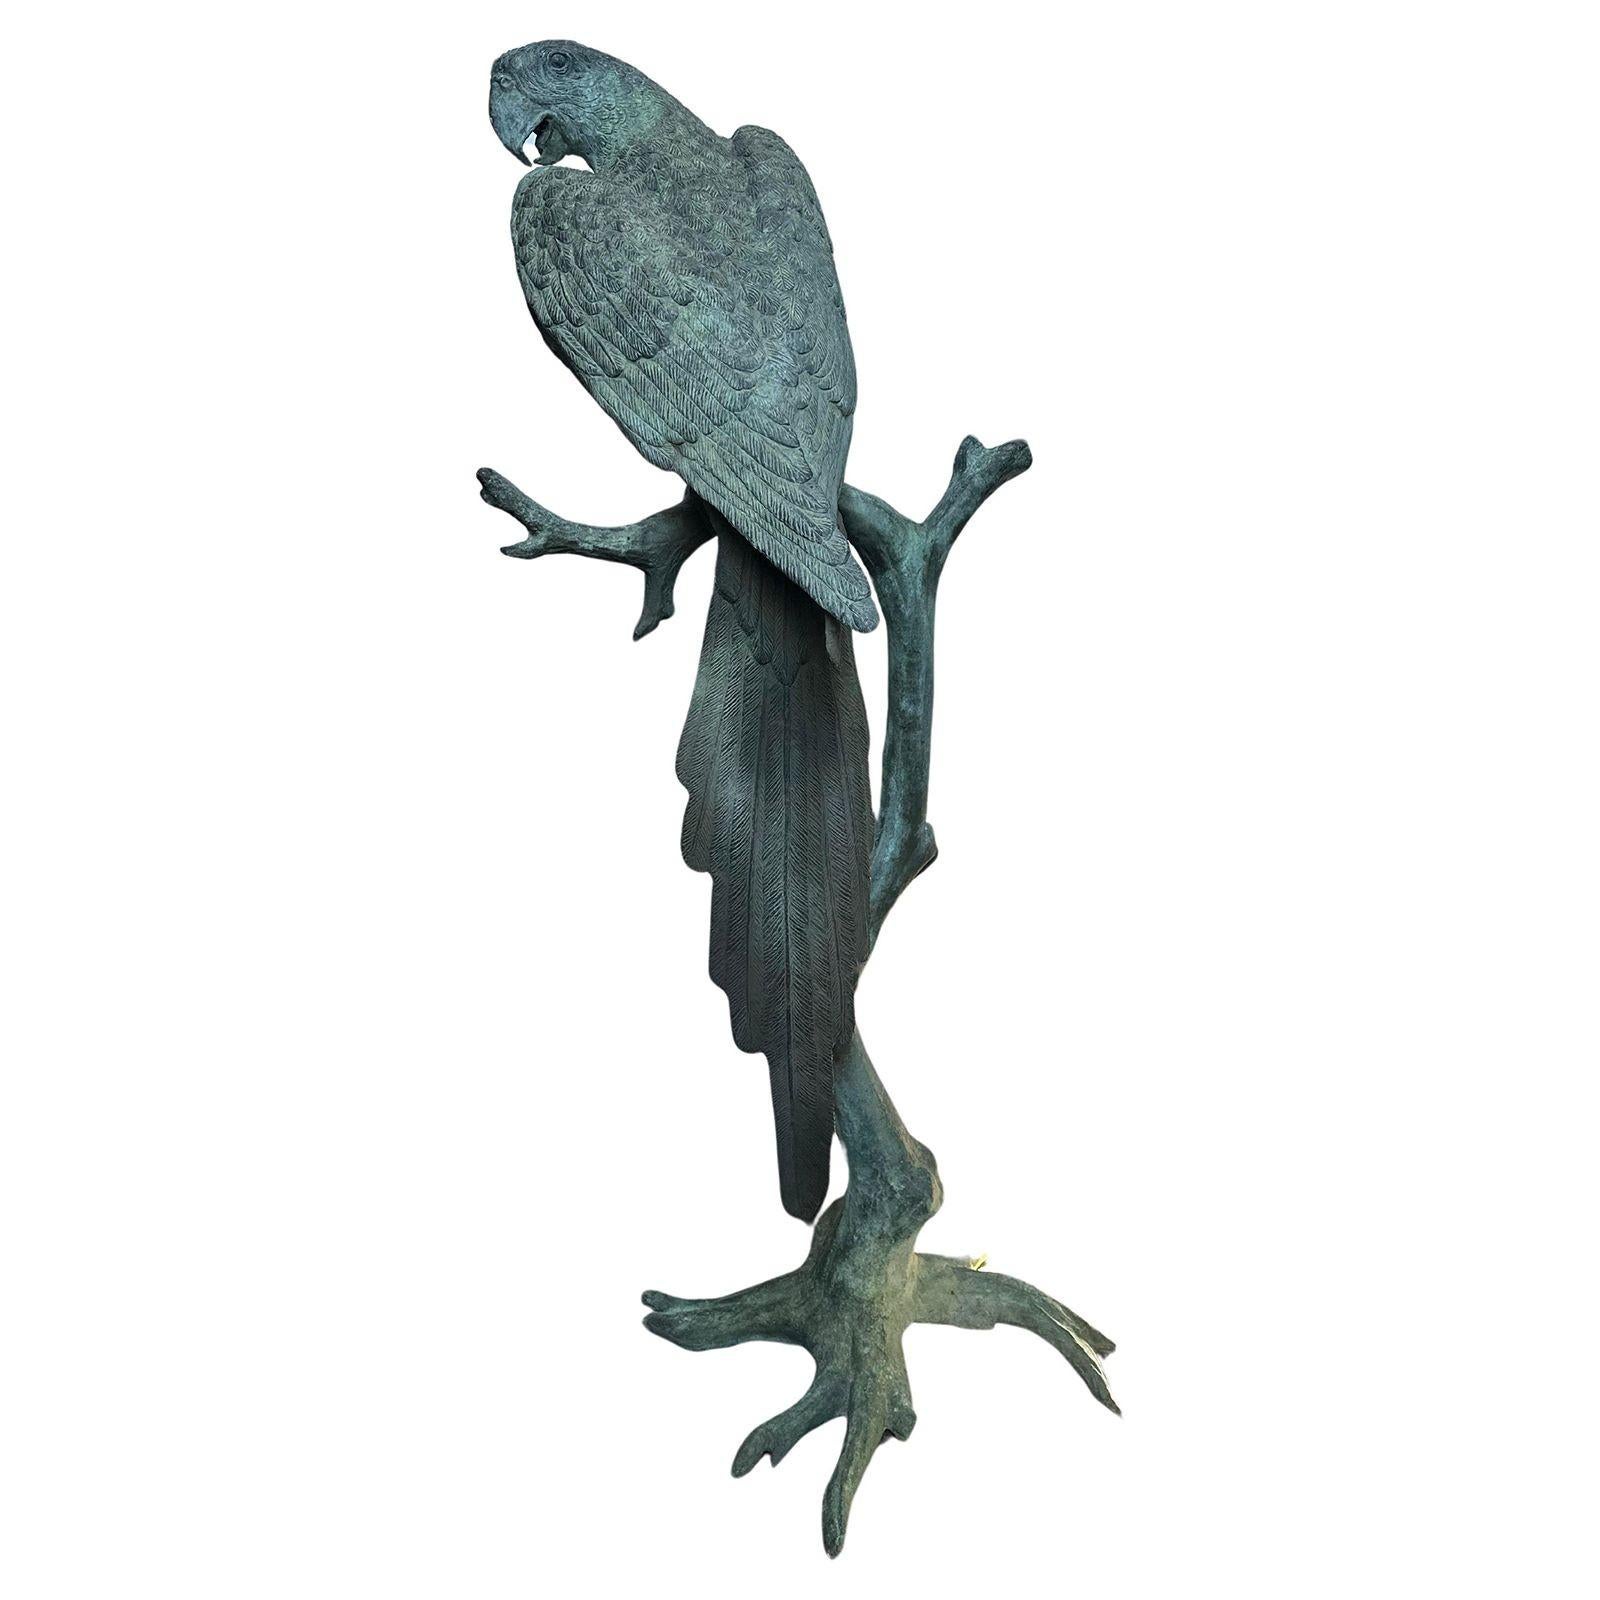 Vintage oversized bronze sculpture of a parrot with green bronze patina after J. Moigniez. This sculpture is meticulously decorated with detail giving it a realistic feel besides its life-size. The piece includes a signature on the root as the